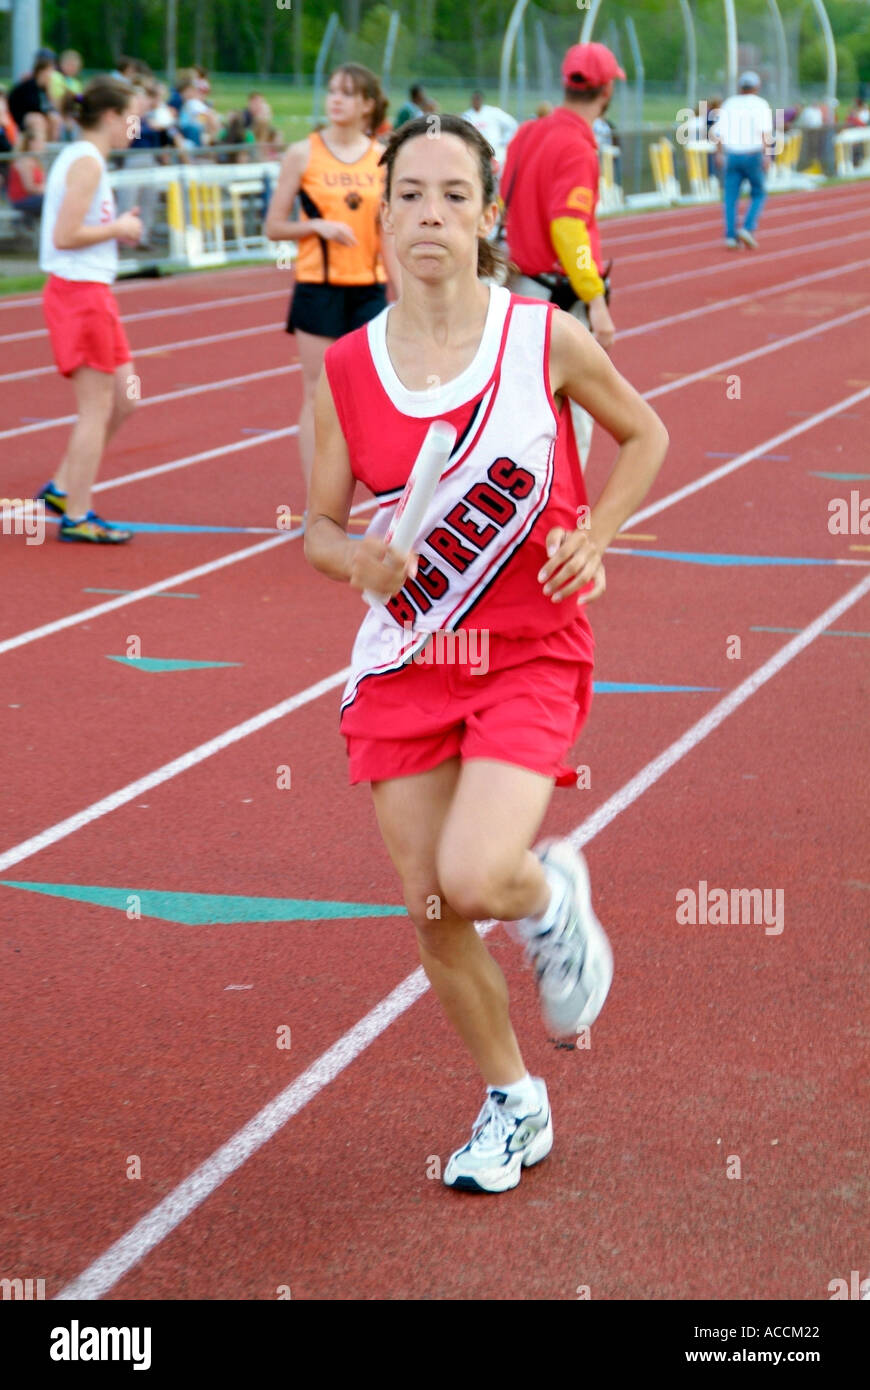 High School Track and Field Events Stock Photo Alamy